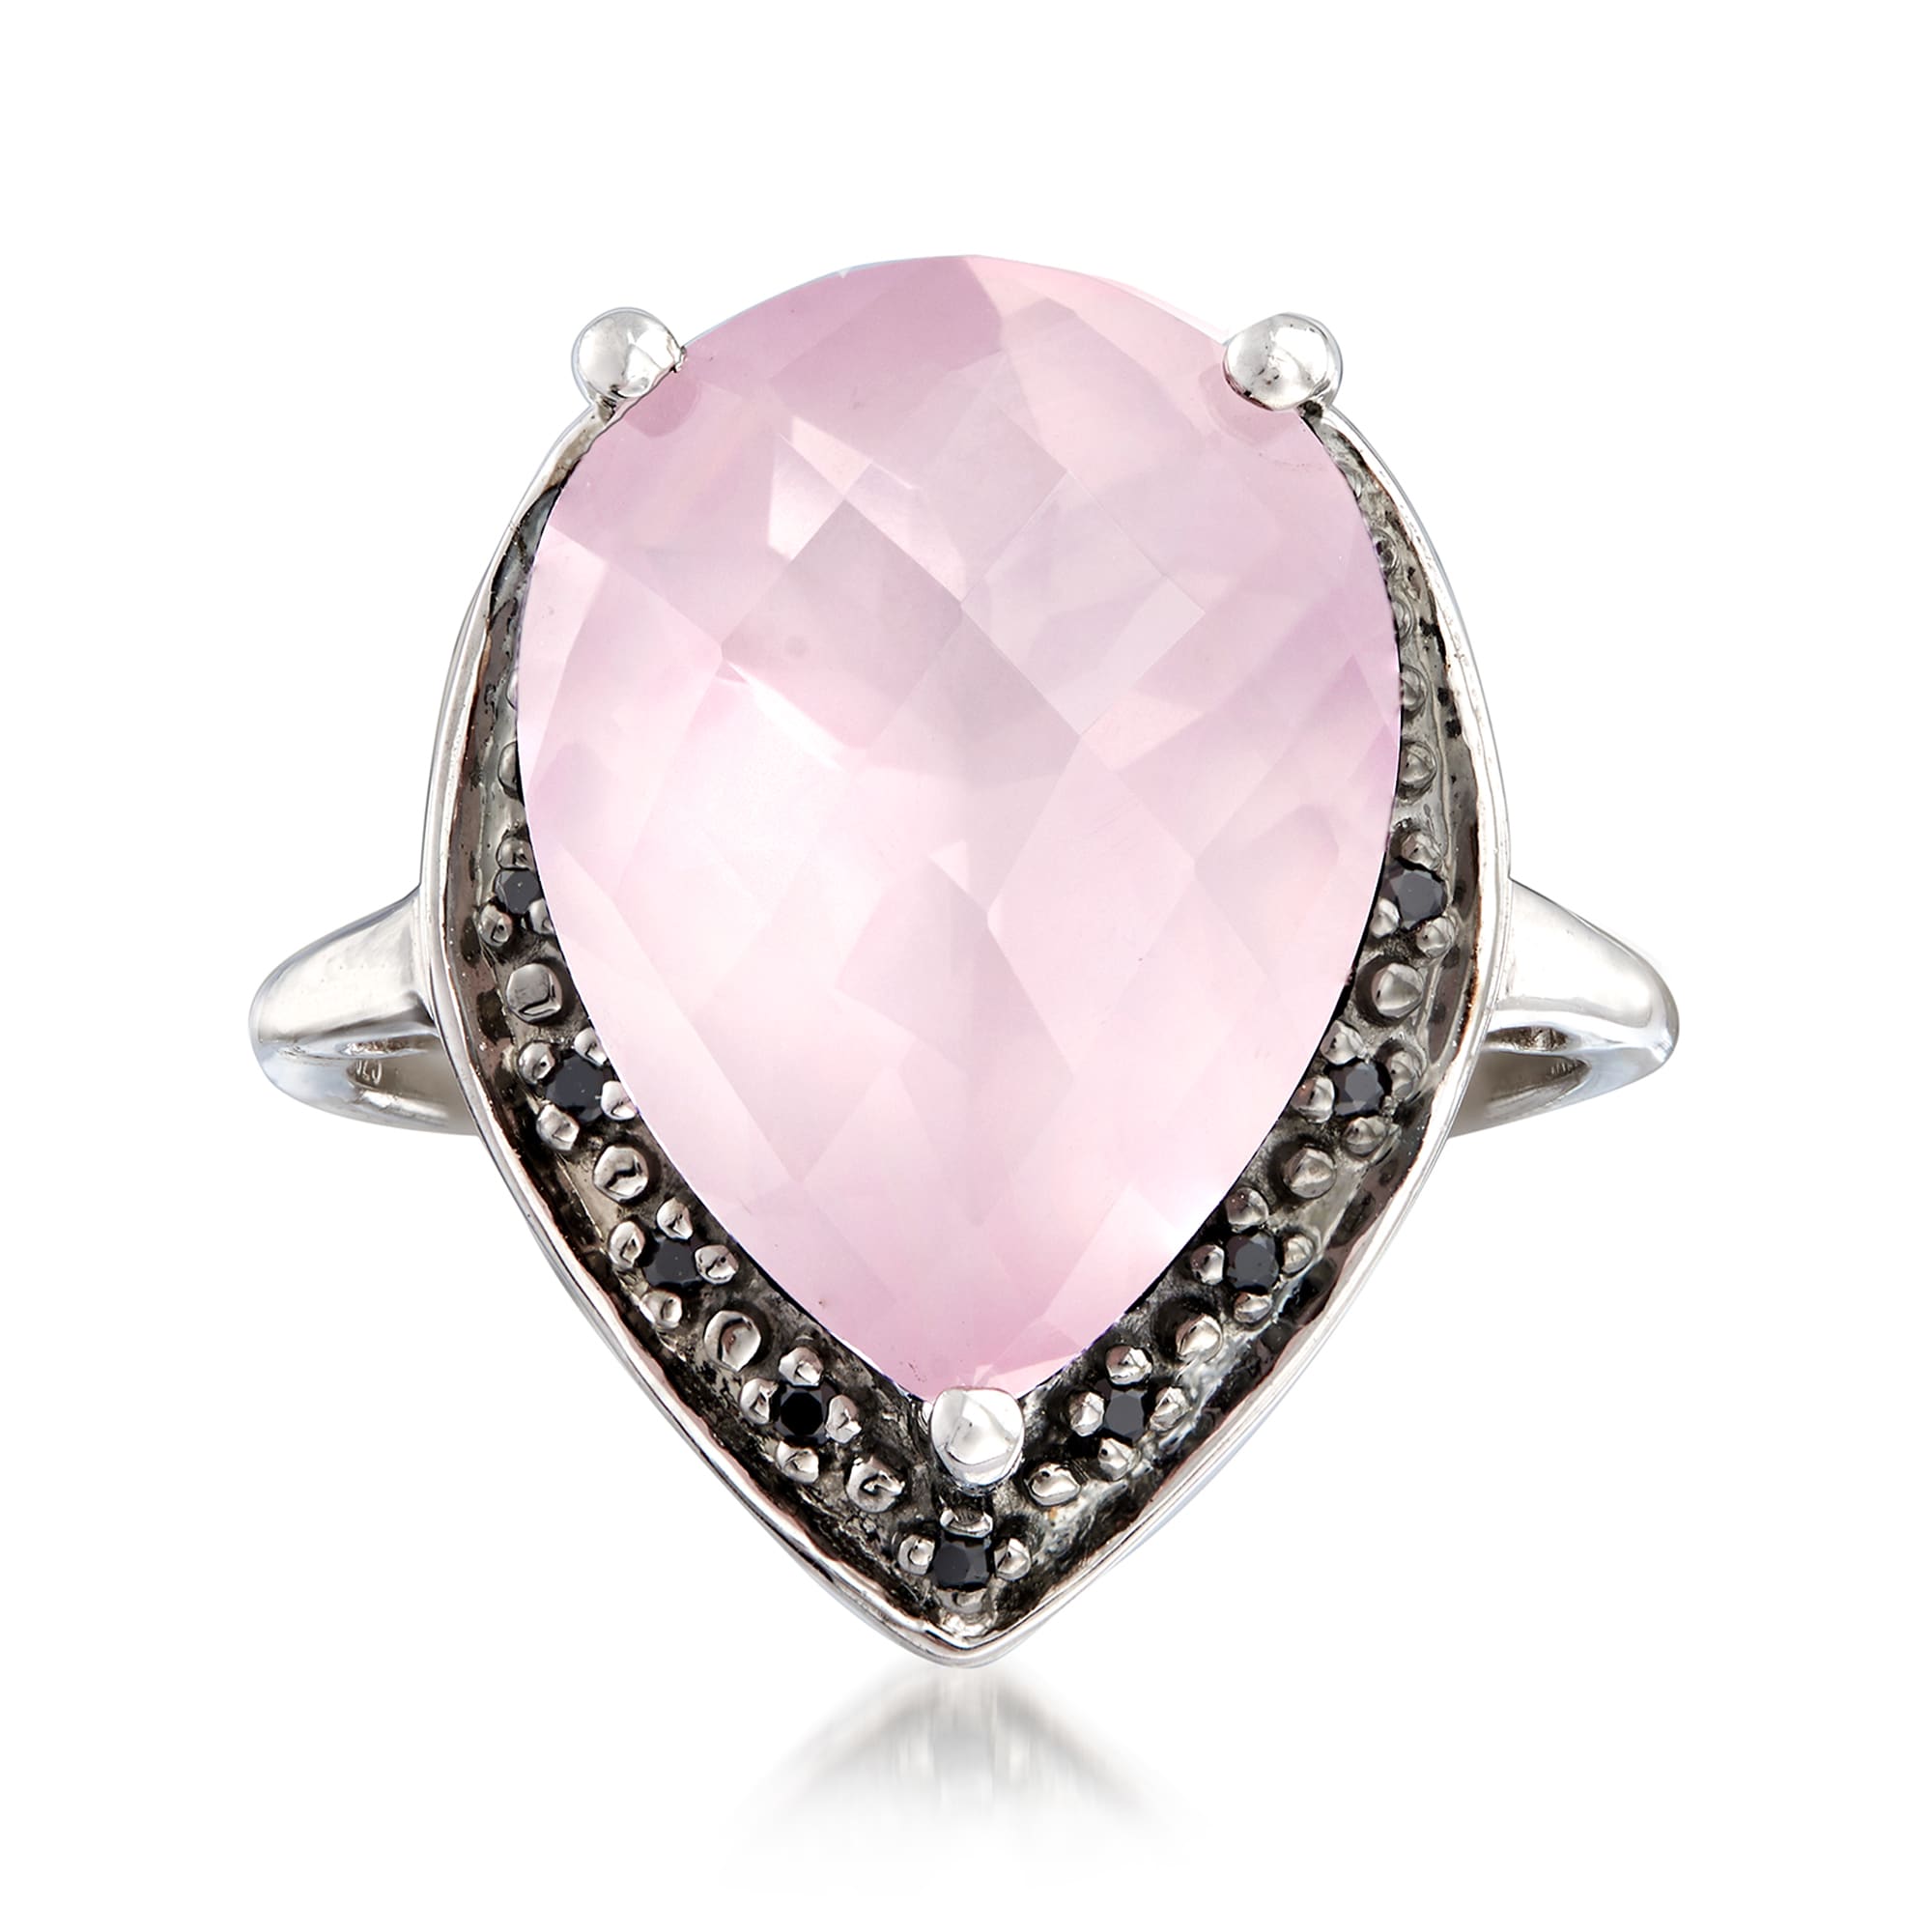 6.25 Carat Rose Quartz Pear-Shaped Ring with Black Spinel Accents in ...